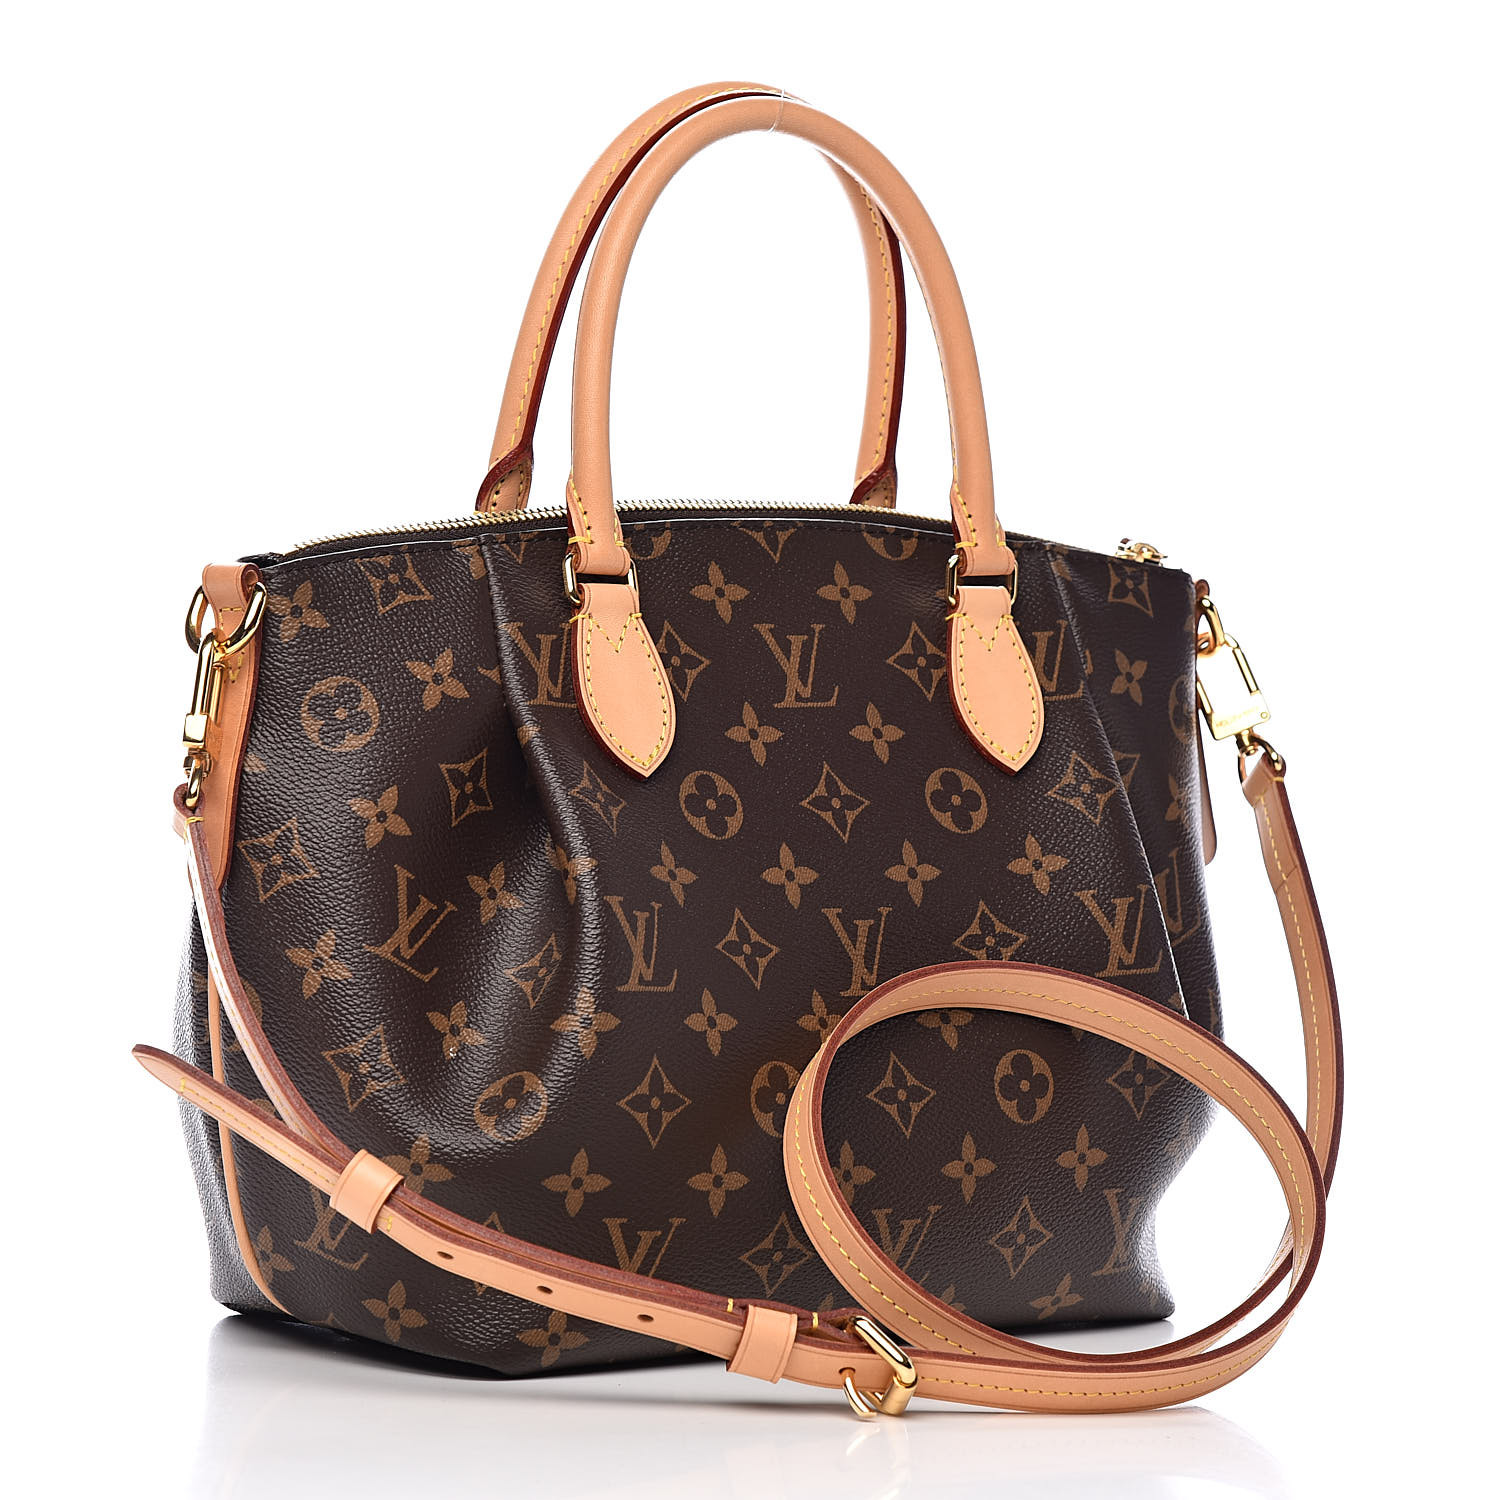 LOUIS VUITTON Epi Turenne PM - More Than You Can Imagine